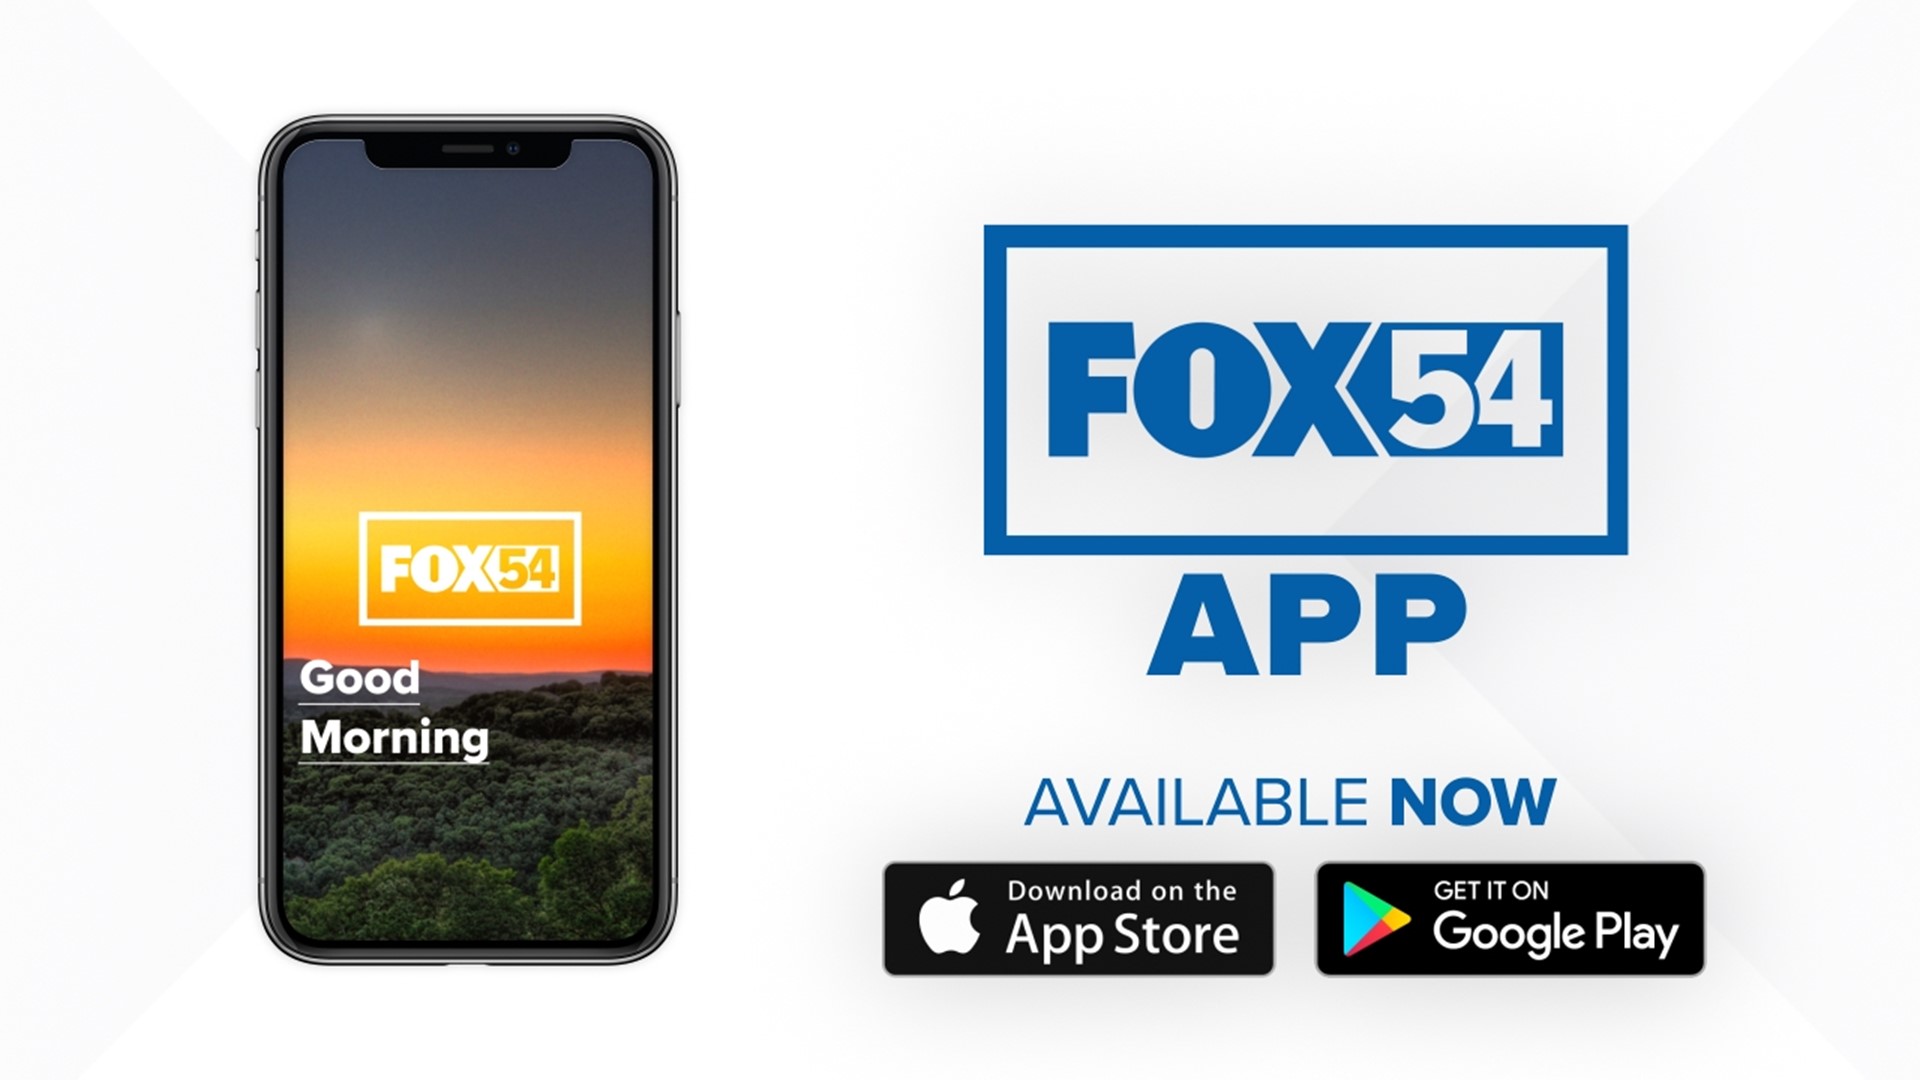 Get FOX54 news and weather updates and push alerts on your devices.